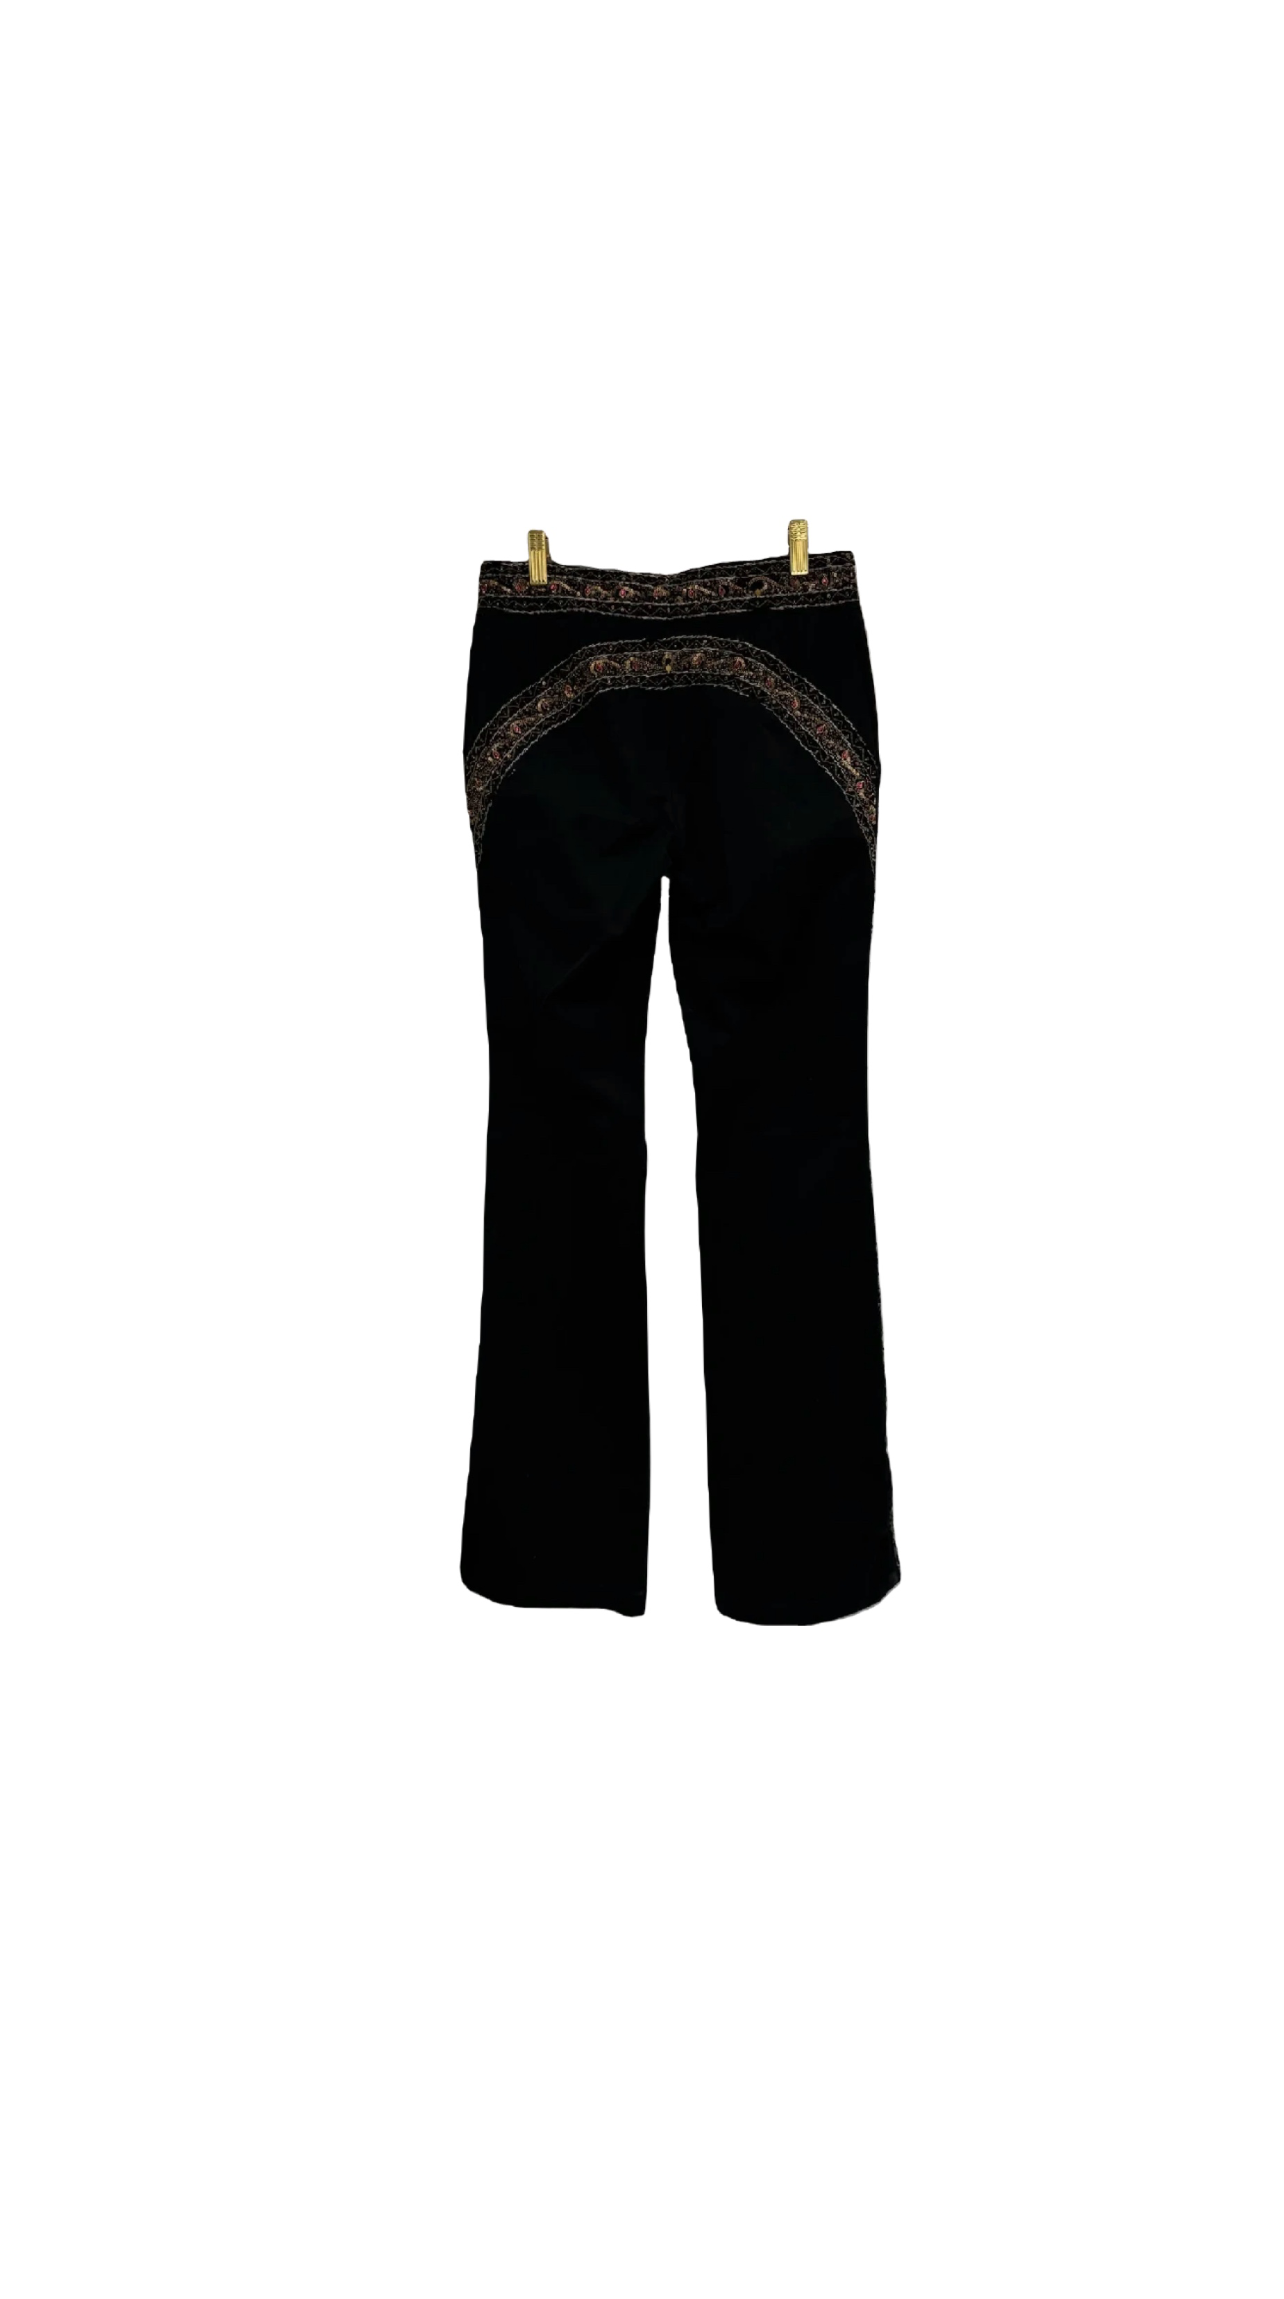 JUST CAVALLI Flared Bead & Sequin Trousers w/ Tags